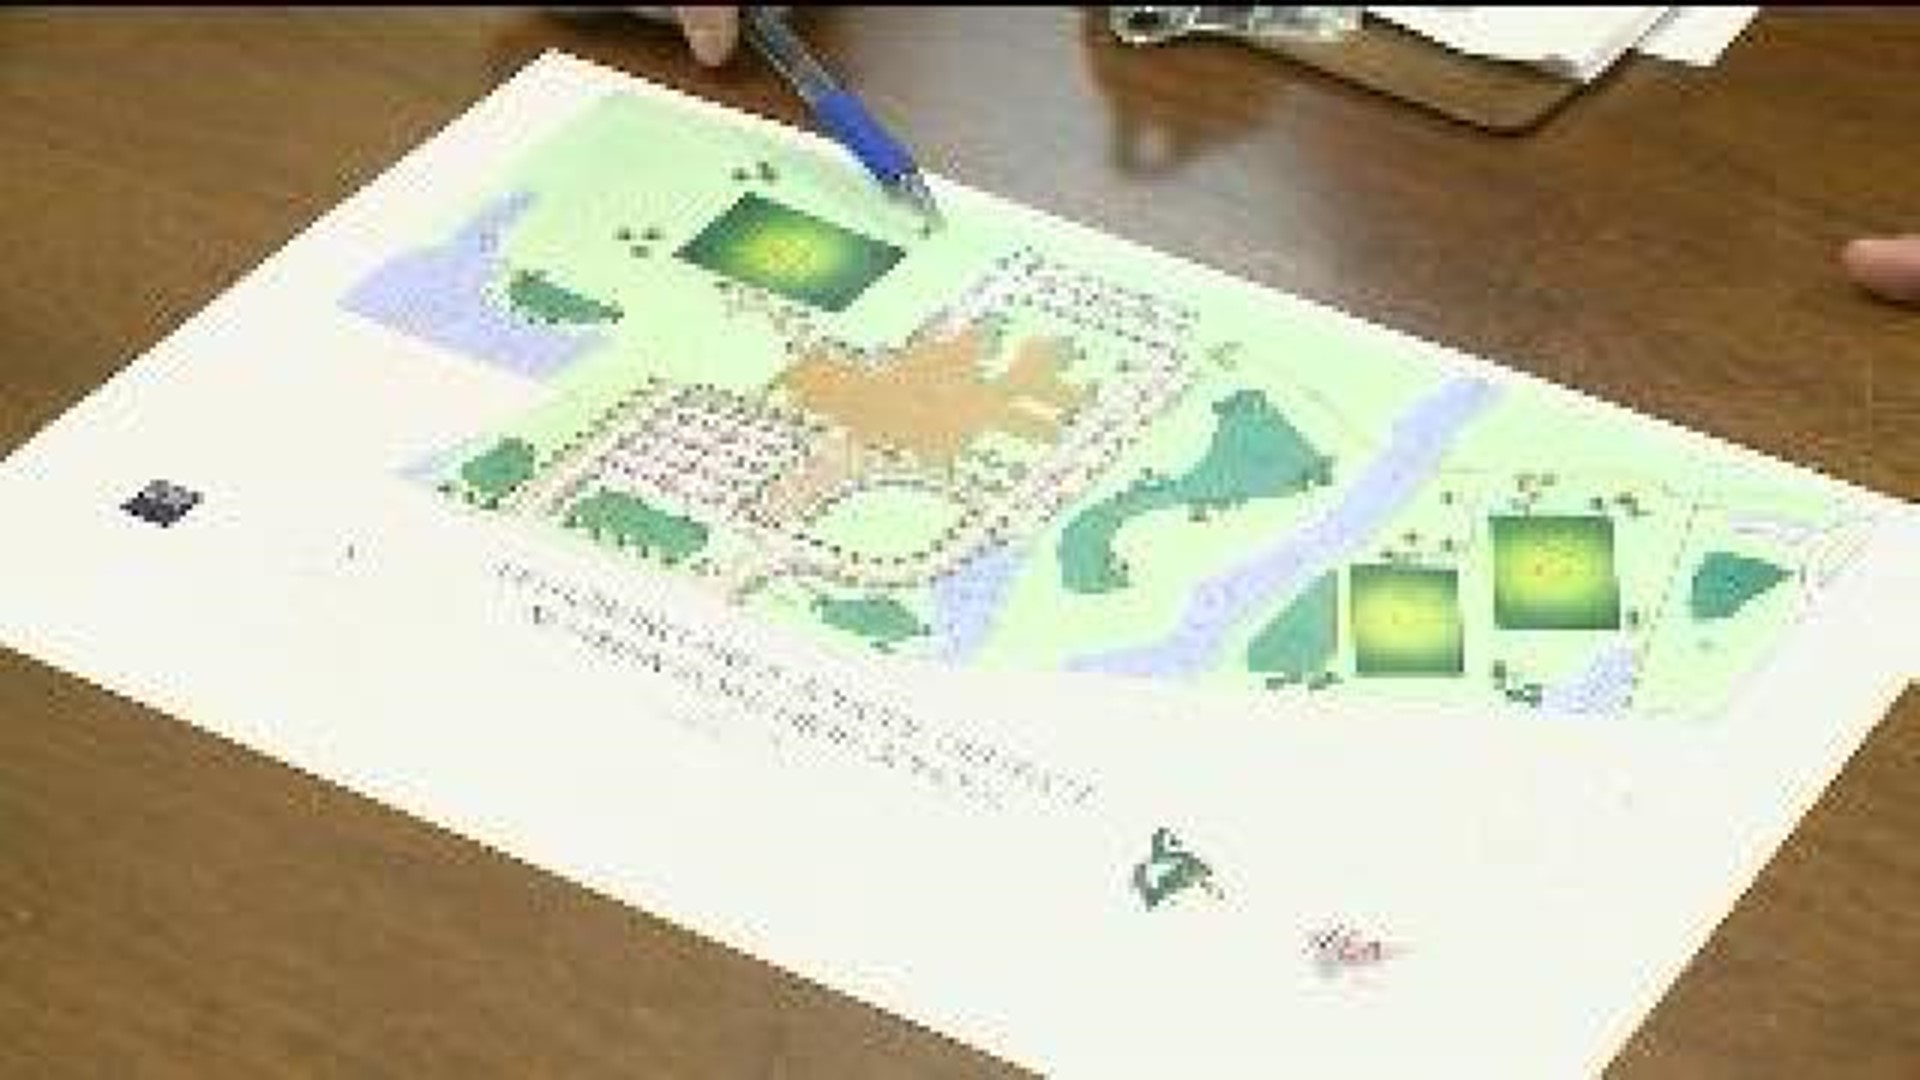 Some Oppose New High School Plans in Lewisburg